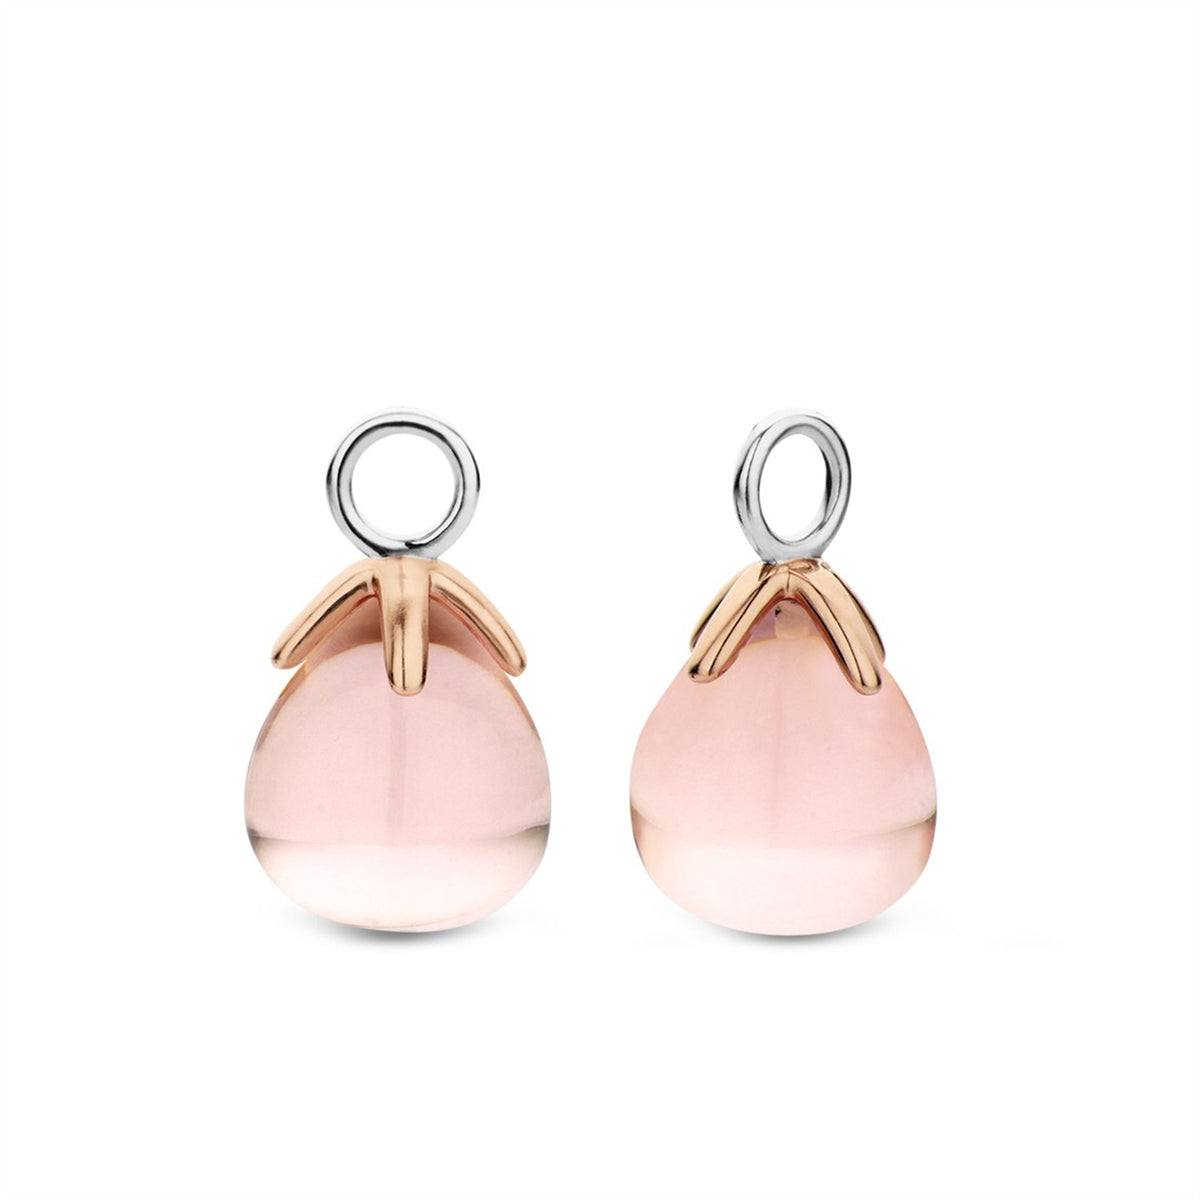 TI SENTO Sterling Silver and Rose Tone Ear Charms with Pink Stone Drops